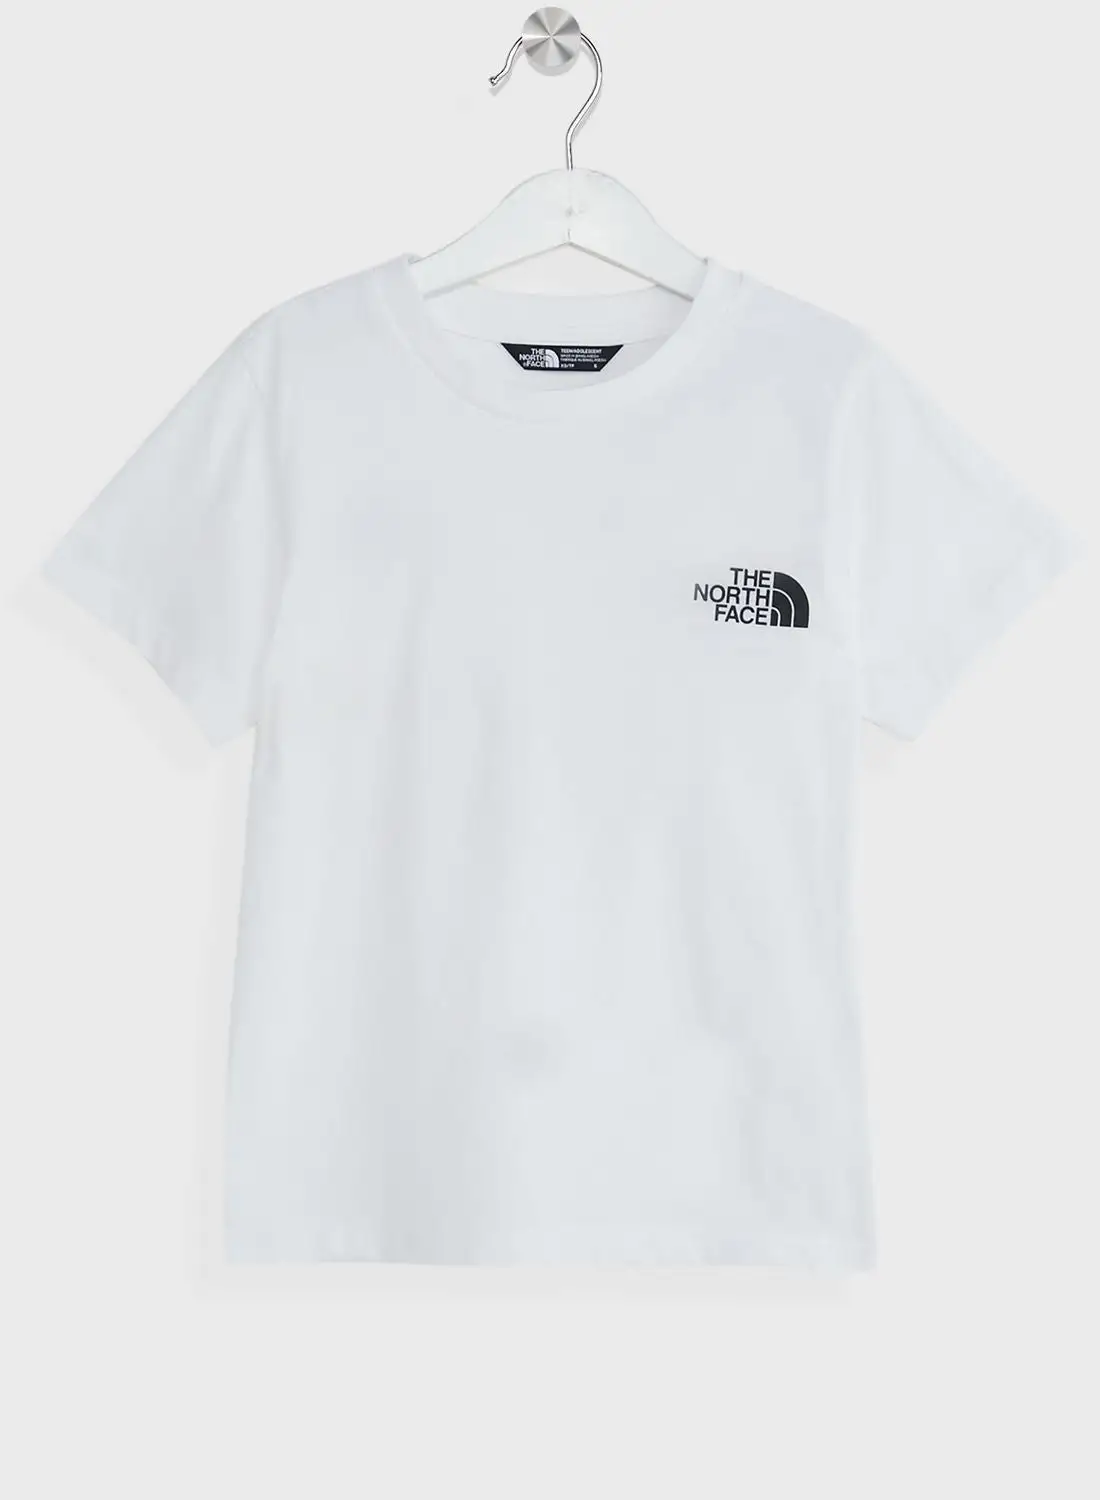 northface Simple Dome Teen T-Shirt